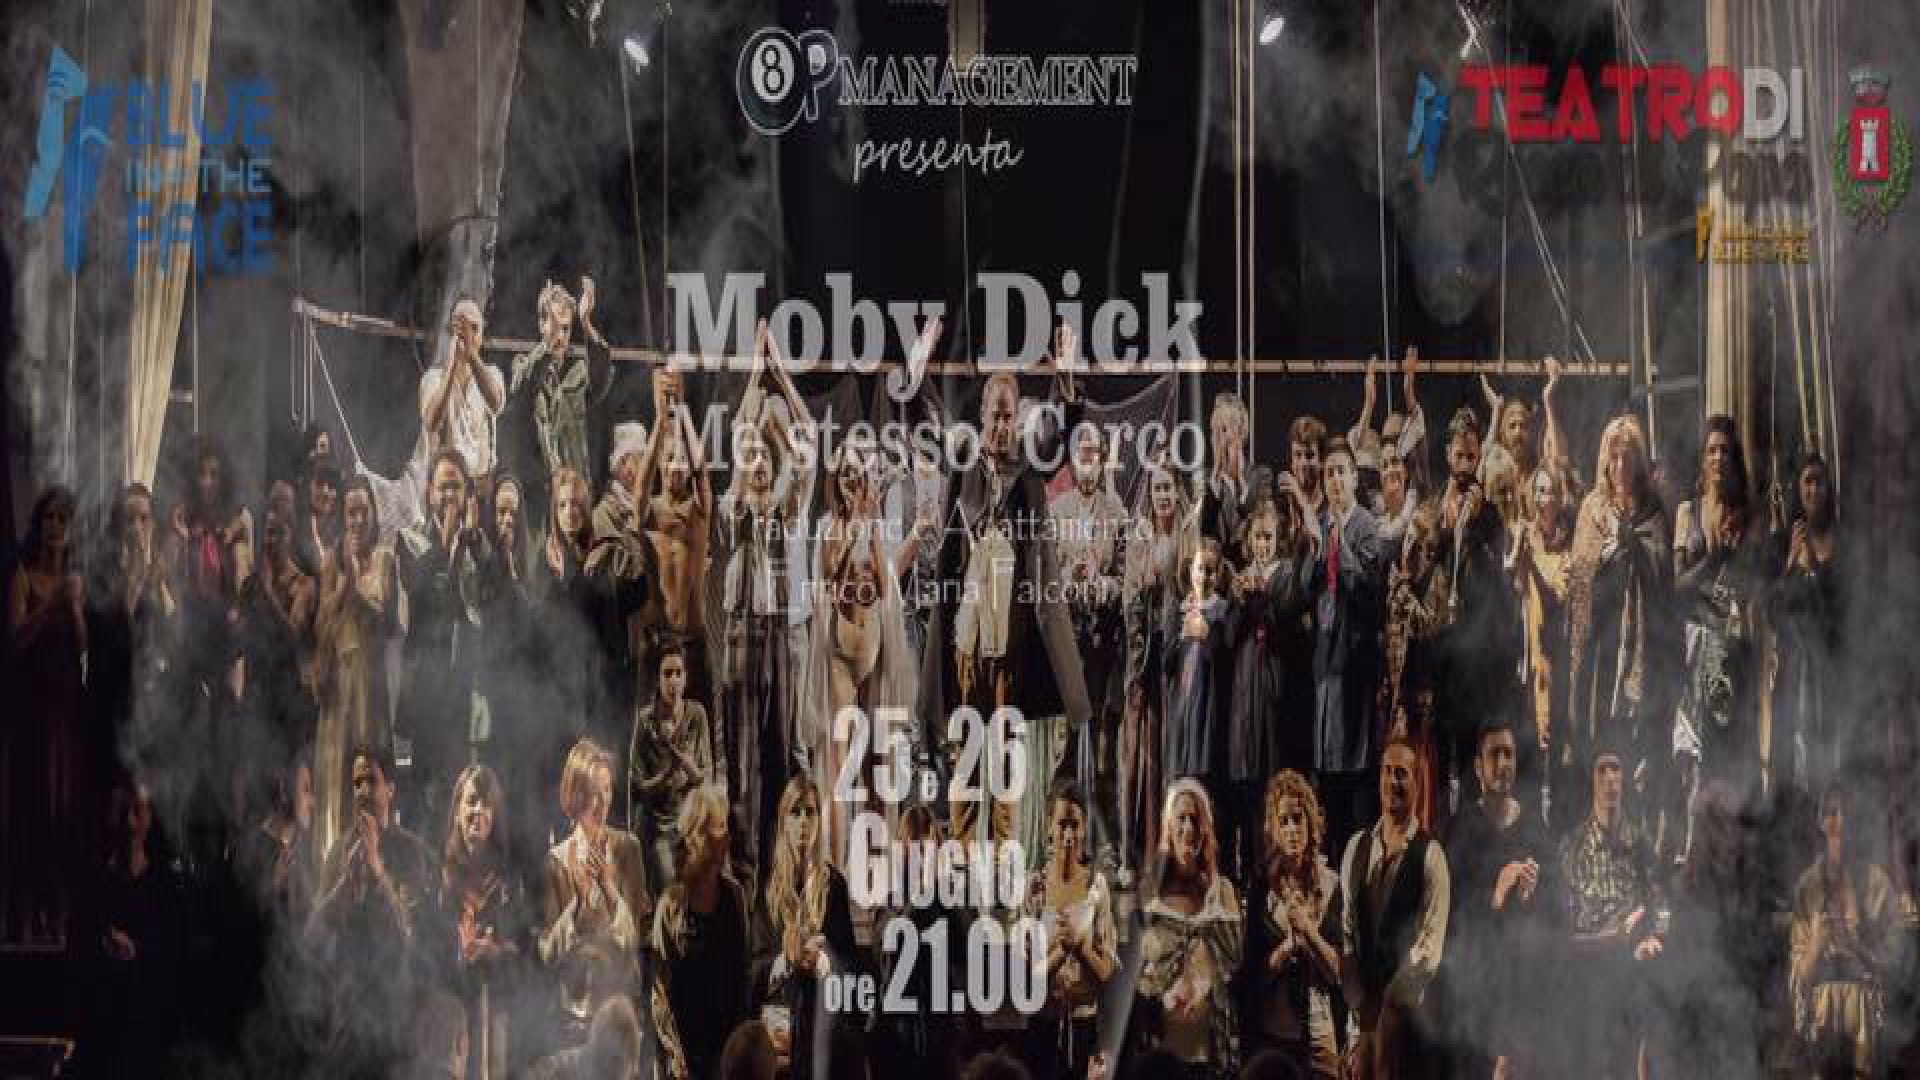 Moby Dick. Me stesso. Cerco